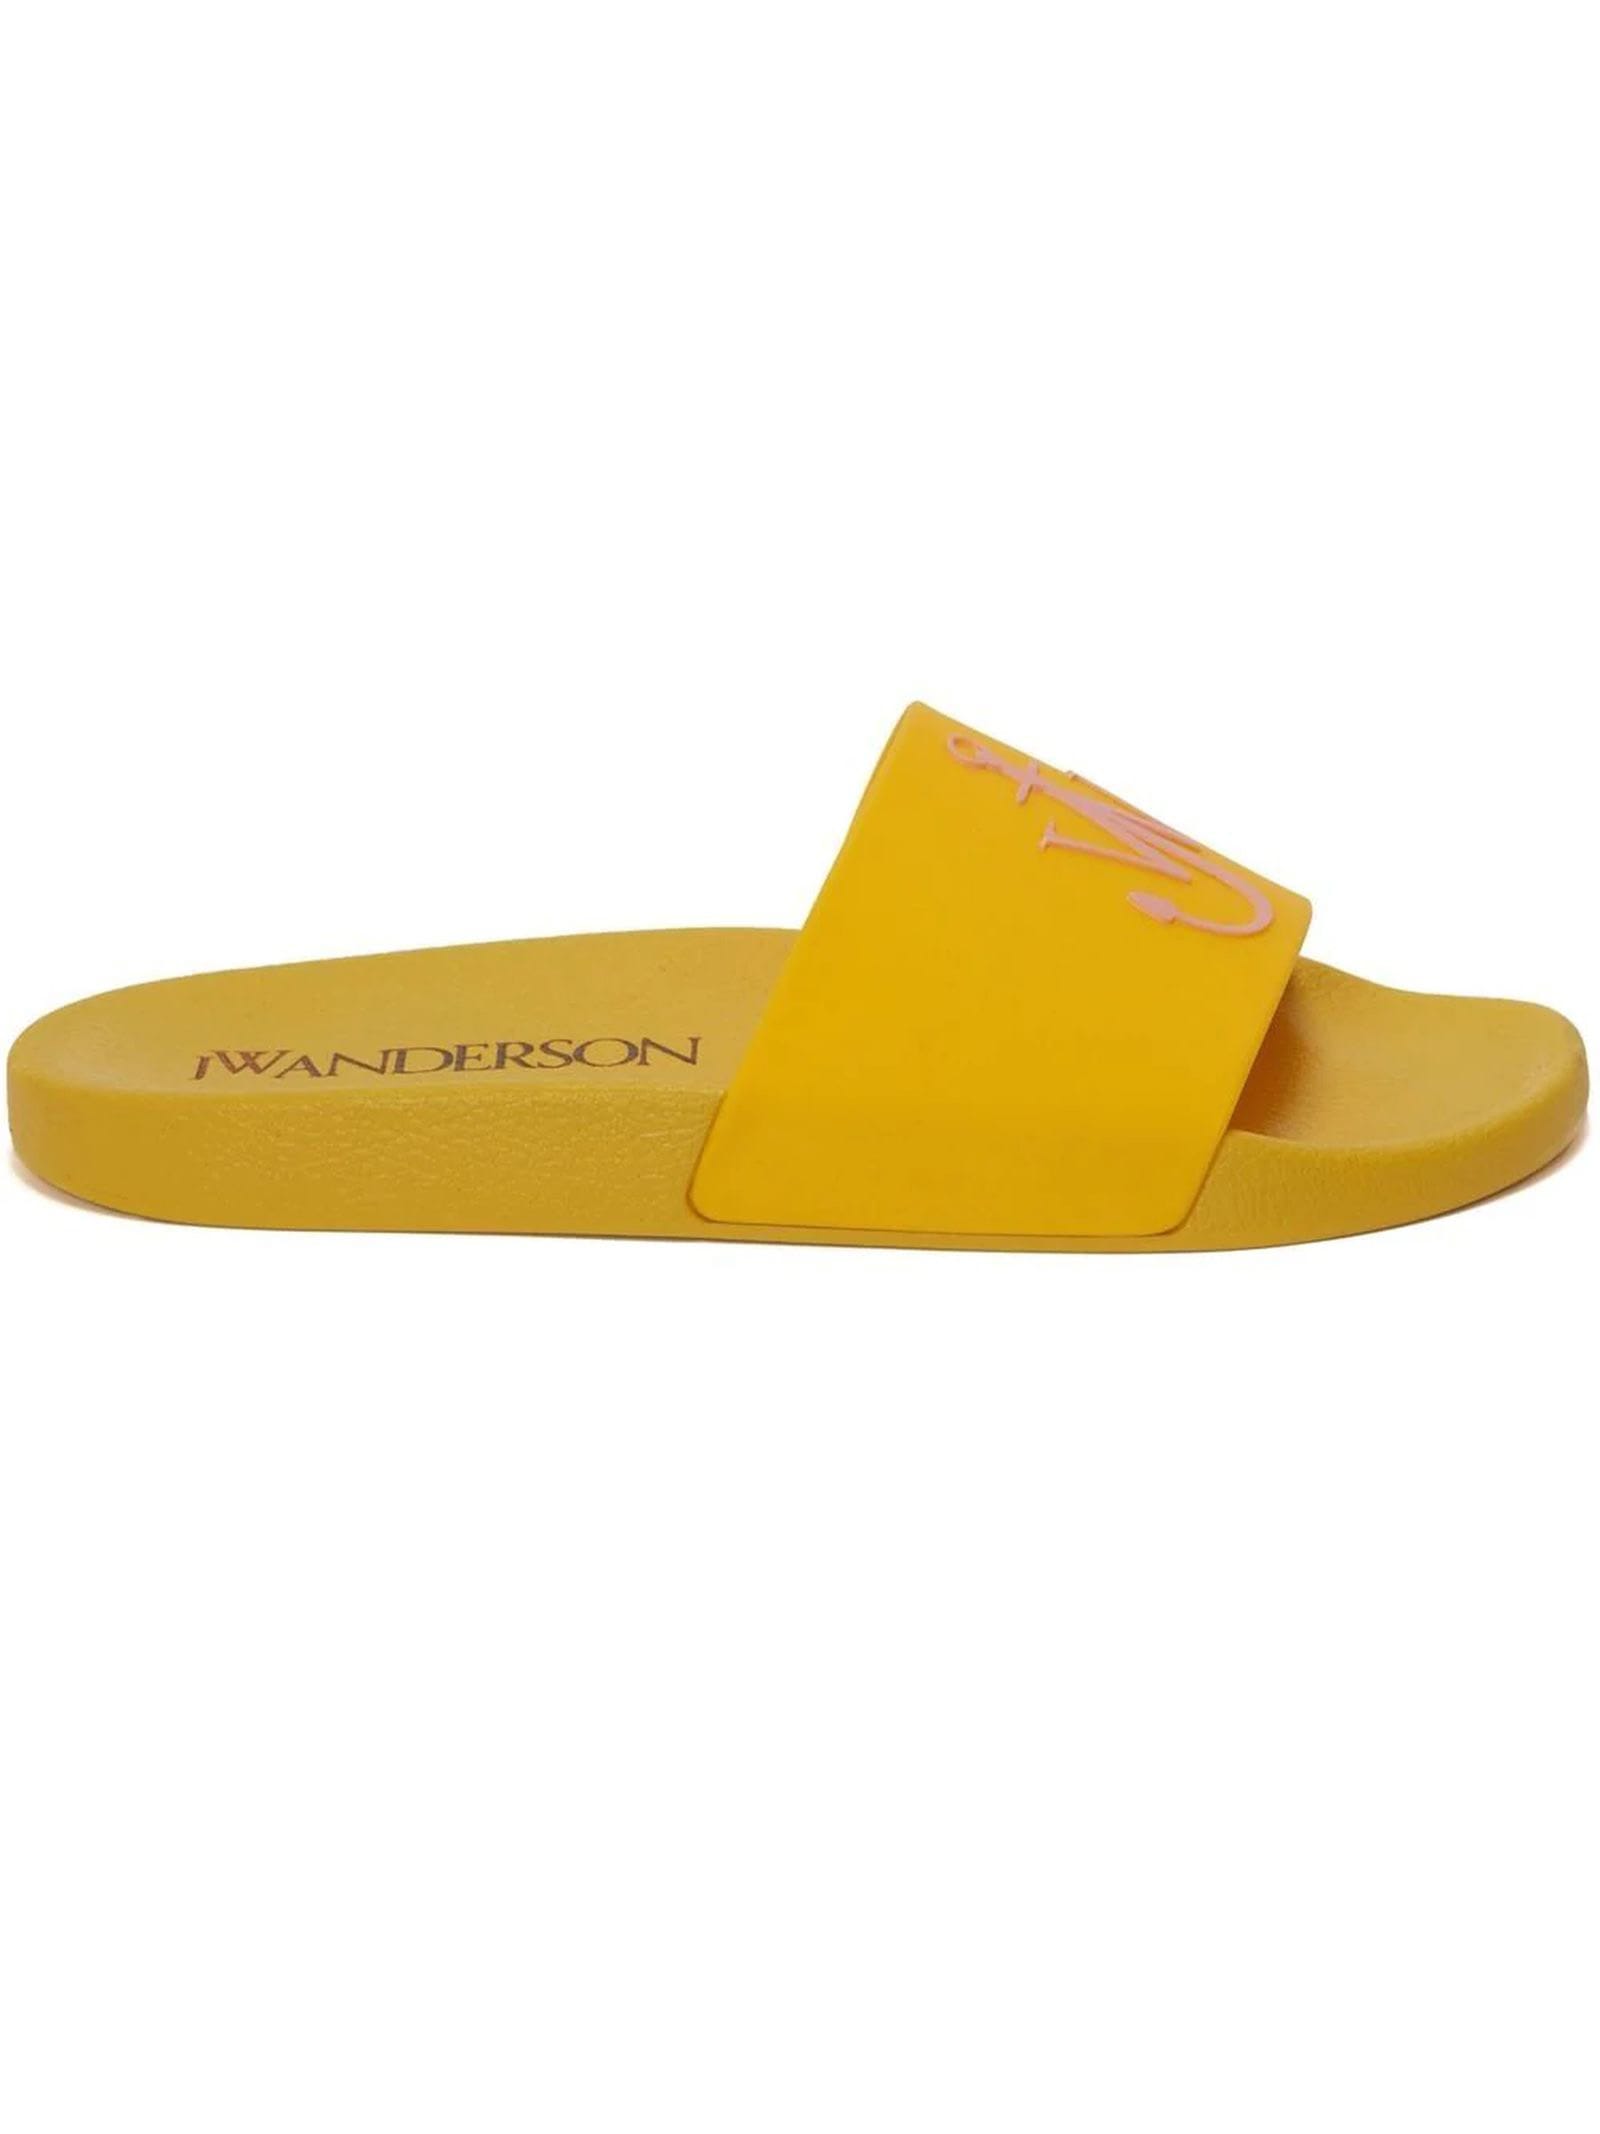 J.W. Anderson Yellow Leather Sandals